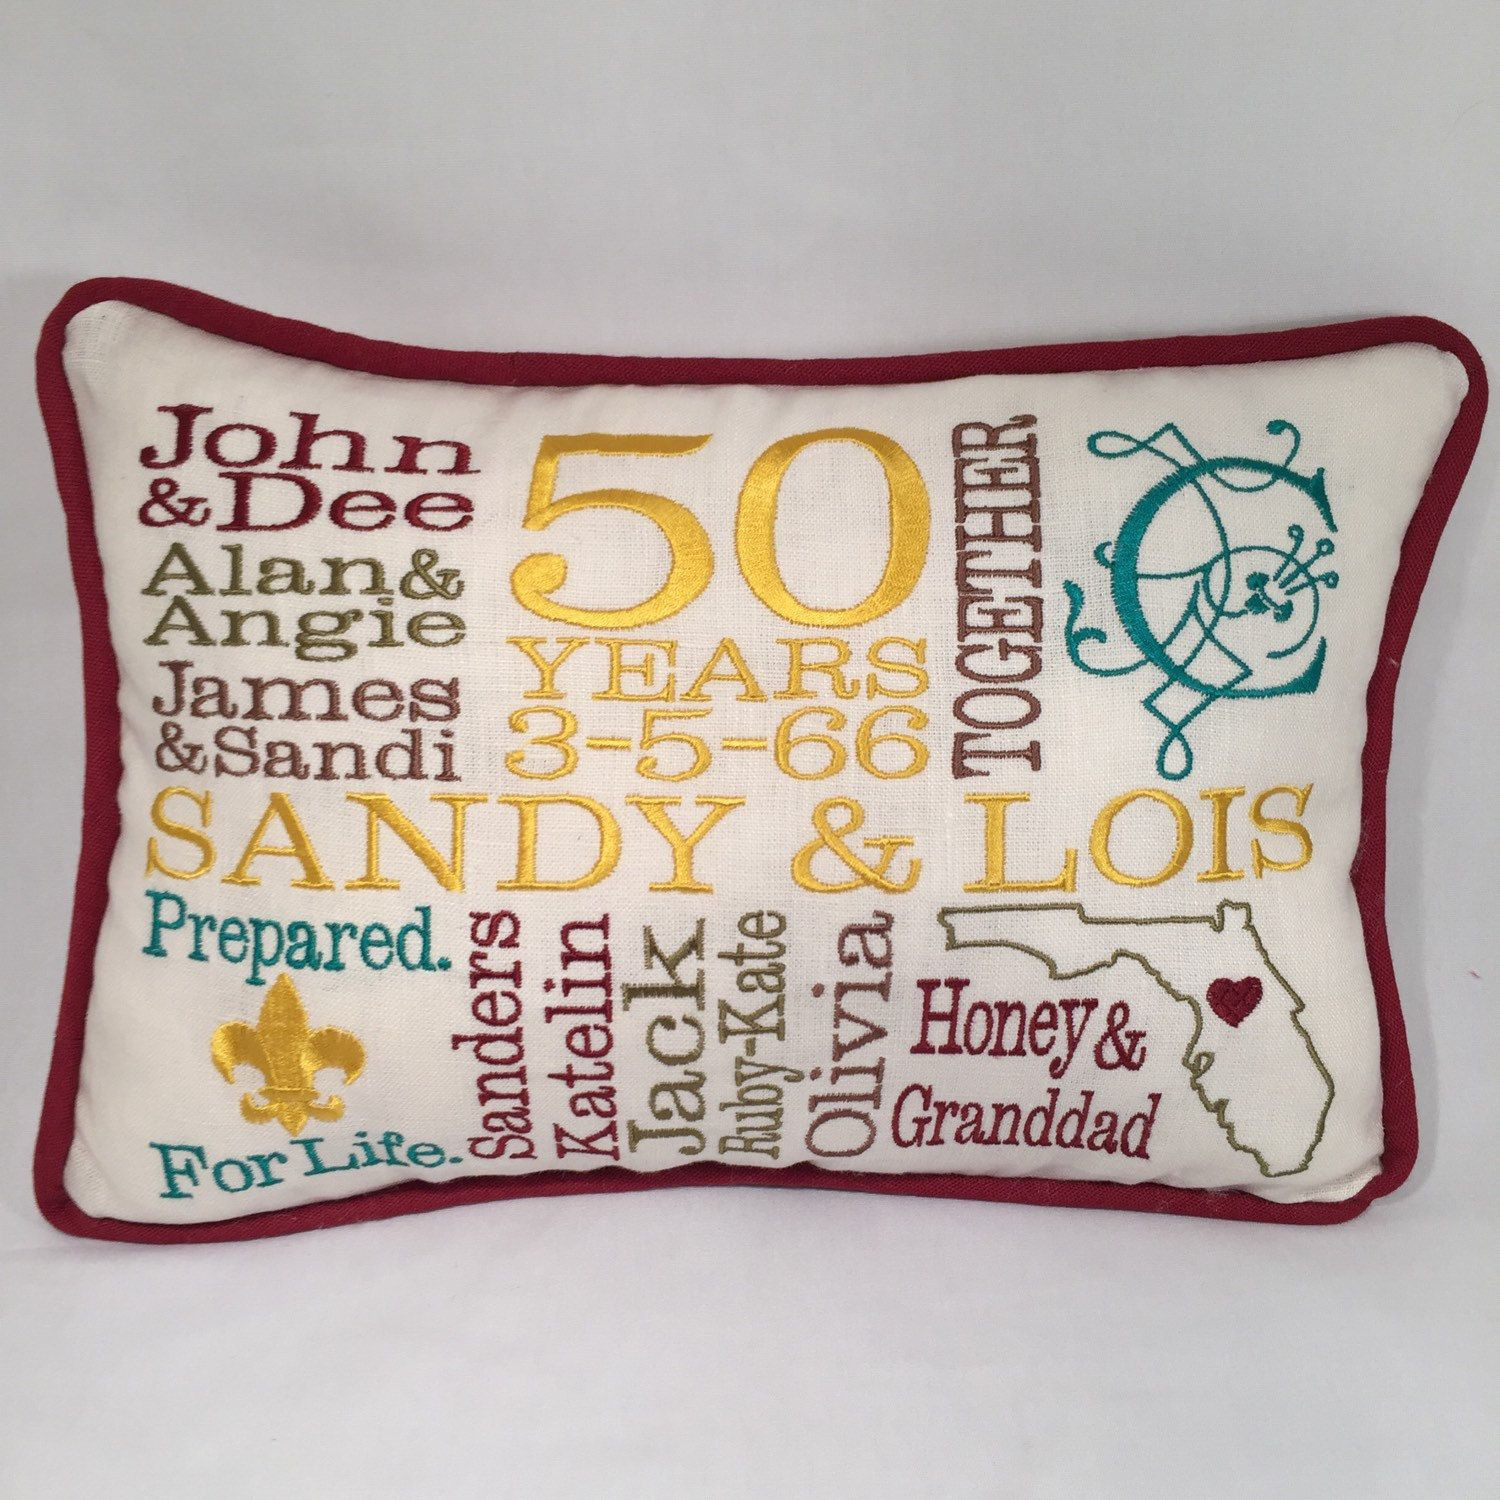 50Th Anniversary Gift Ideas For Grandparents
 50th Anniversary Gift Idea A great way to celebrate a